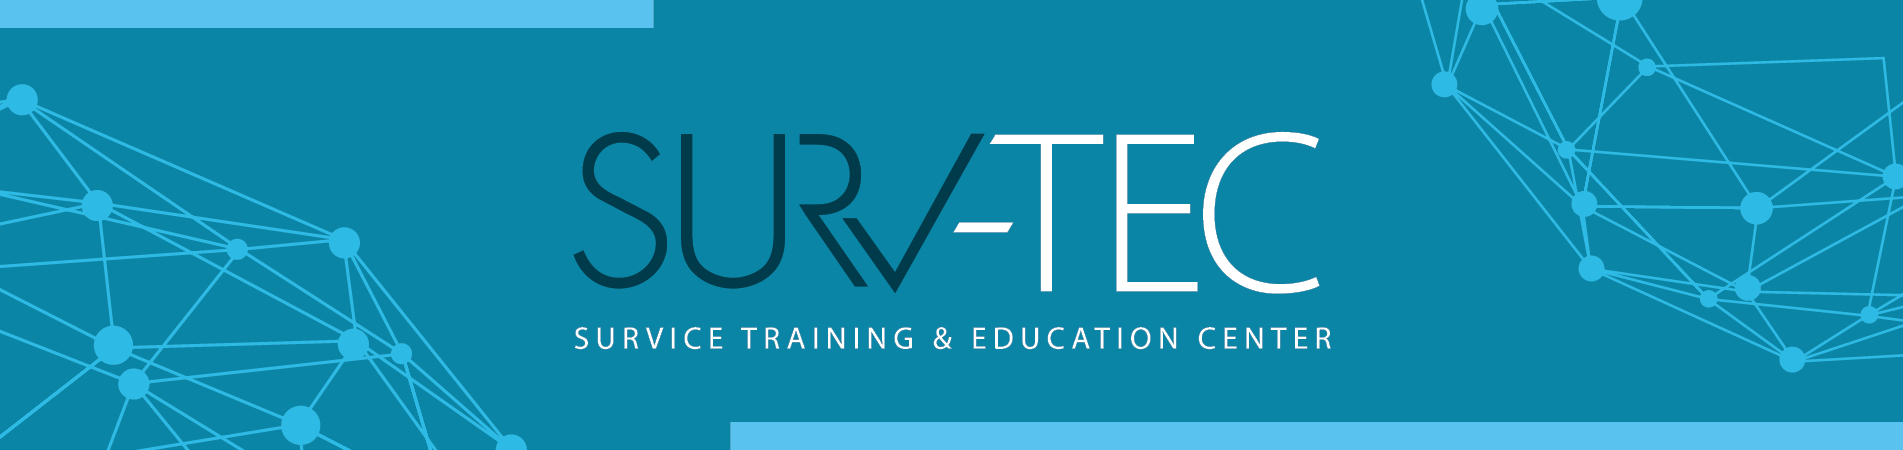 The New SURVICE Training & Education Center, Coming Soon!